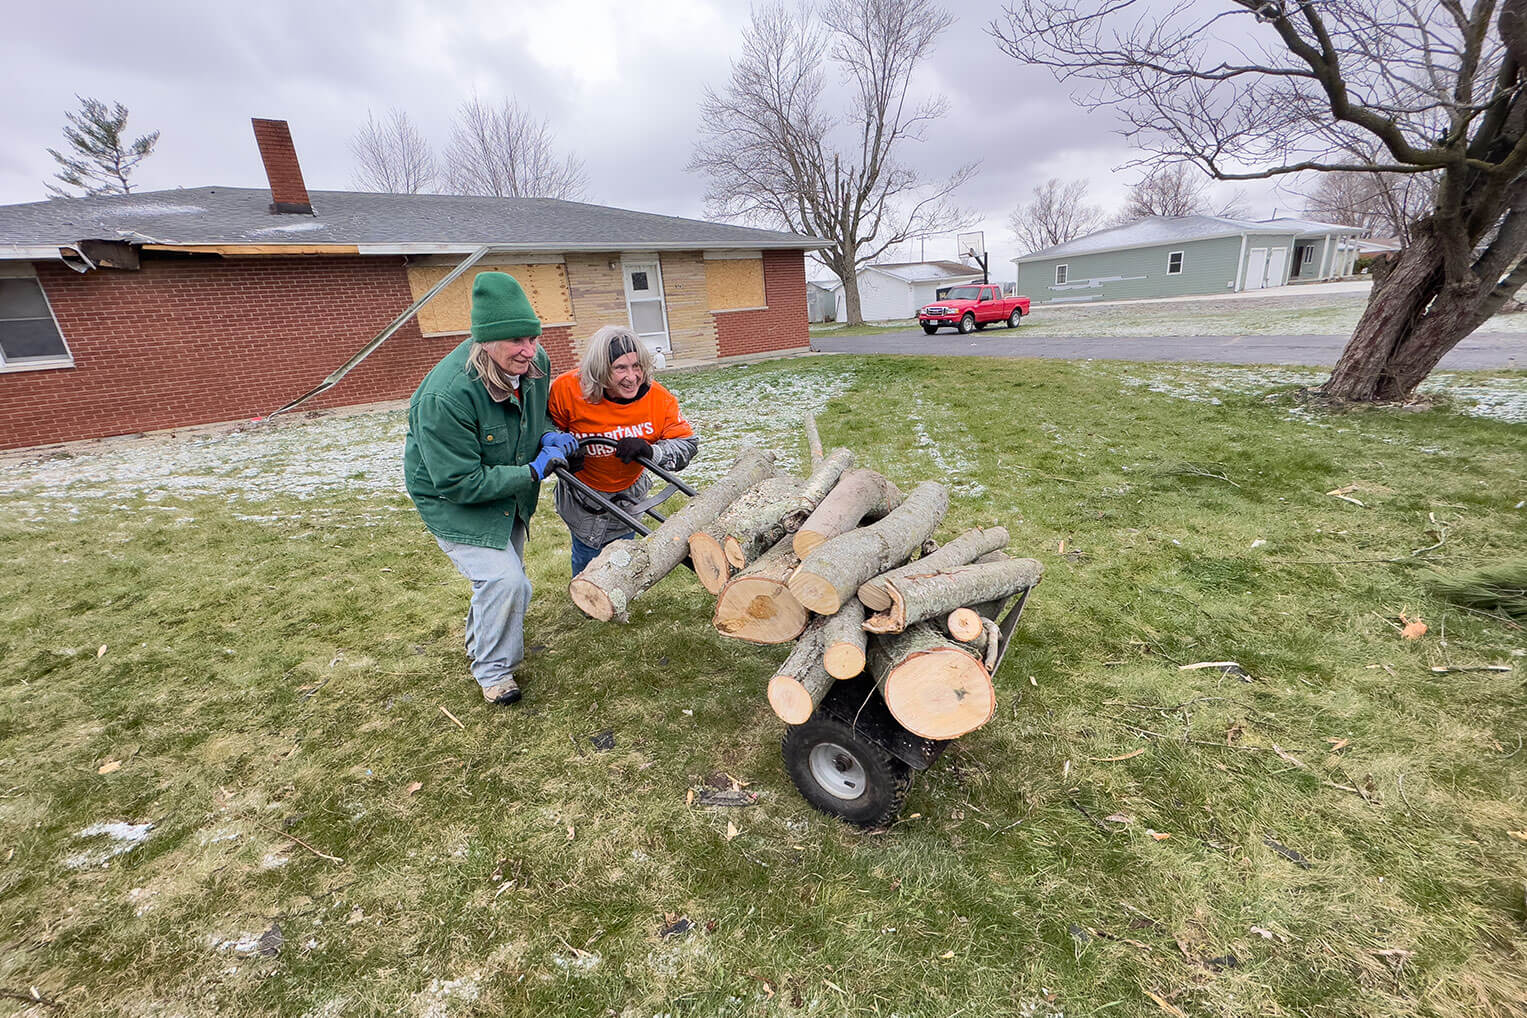 Cathy Douthwaite, right, works joyfully in the cold hauling a cut tree to the street.